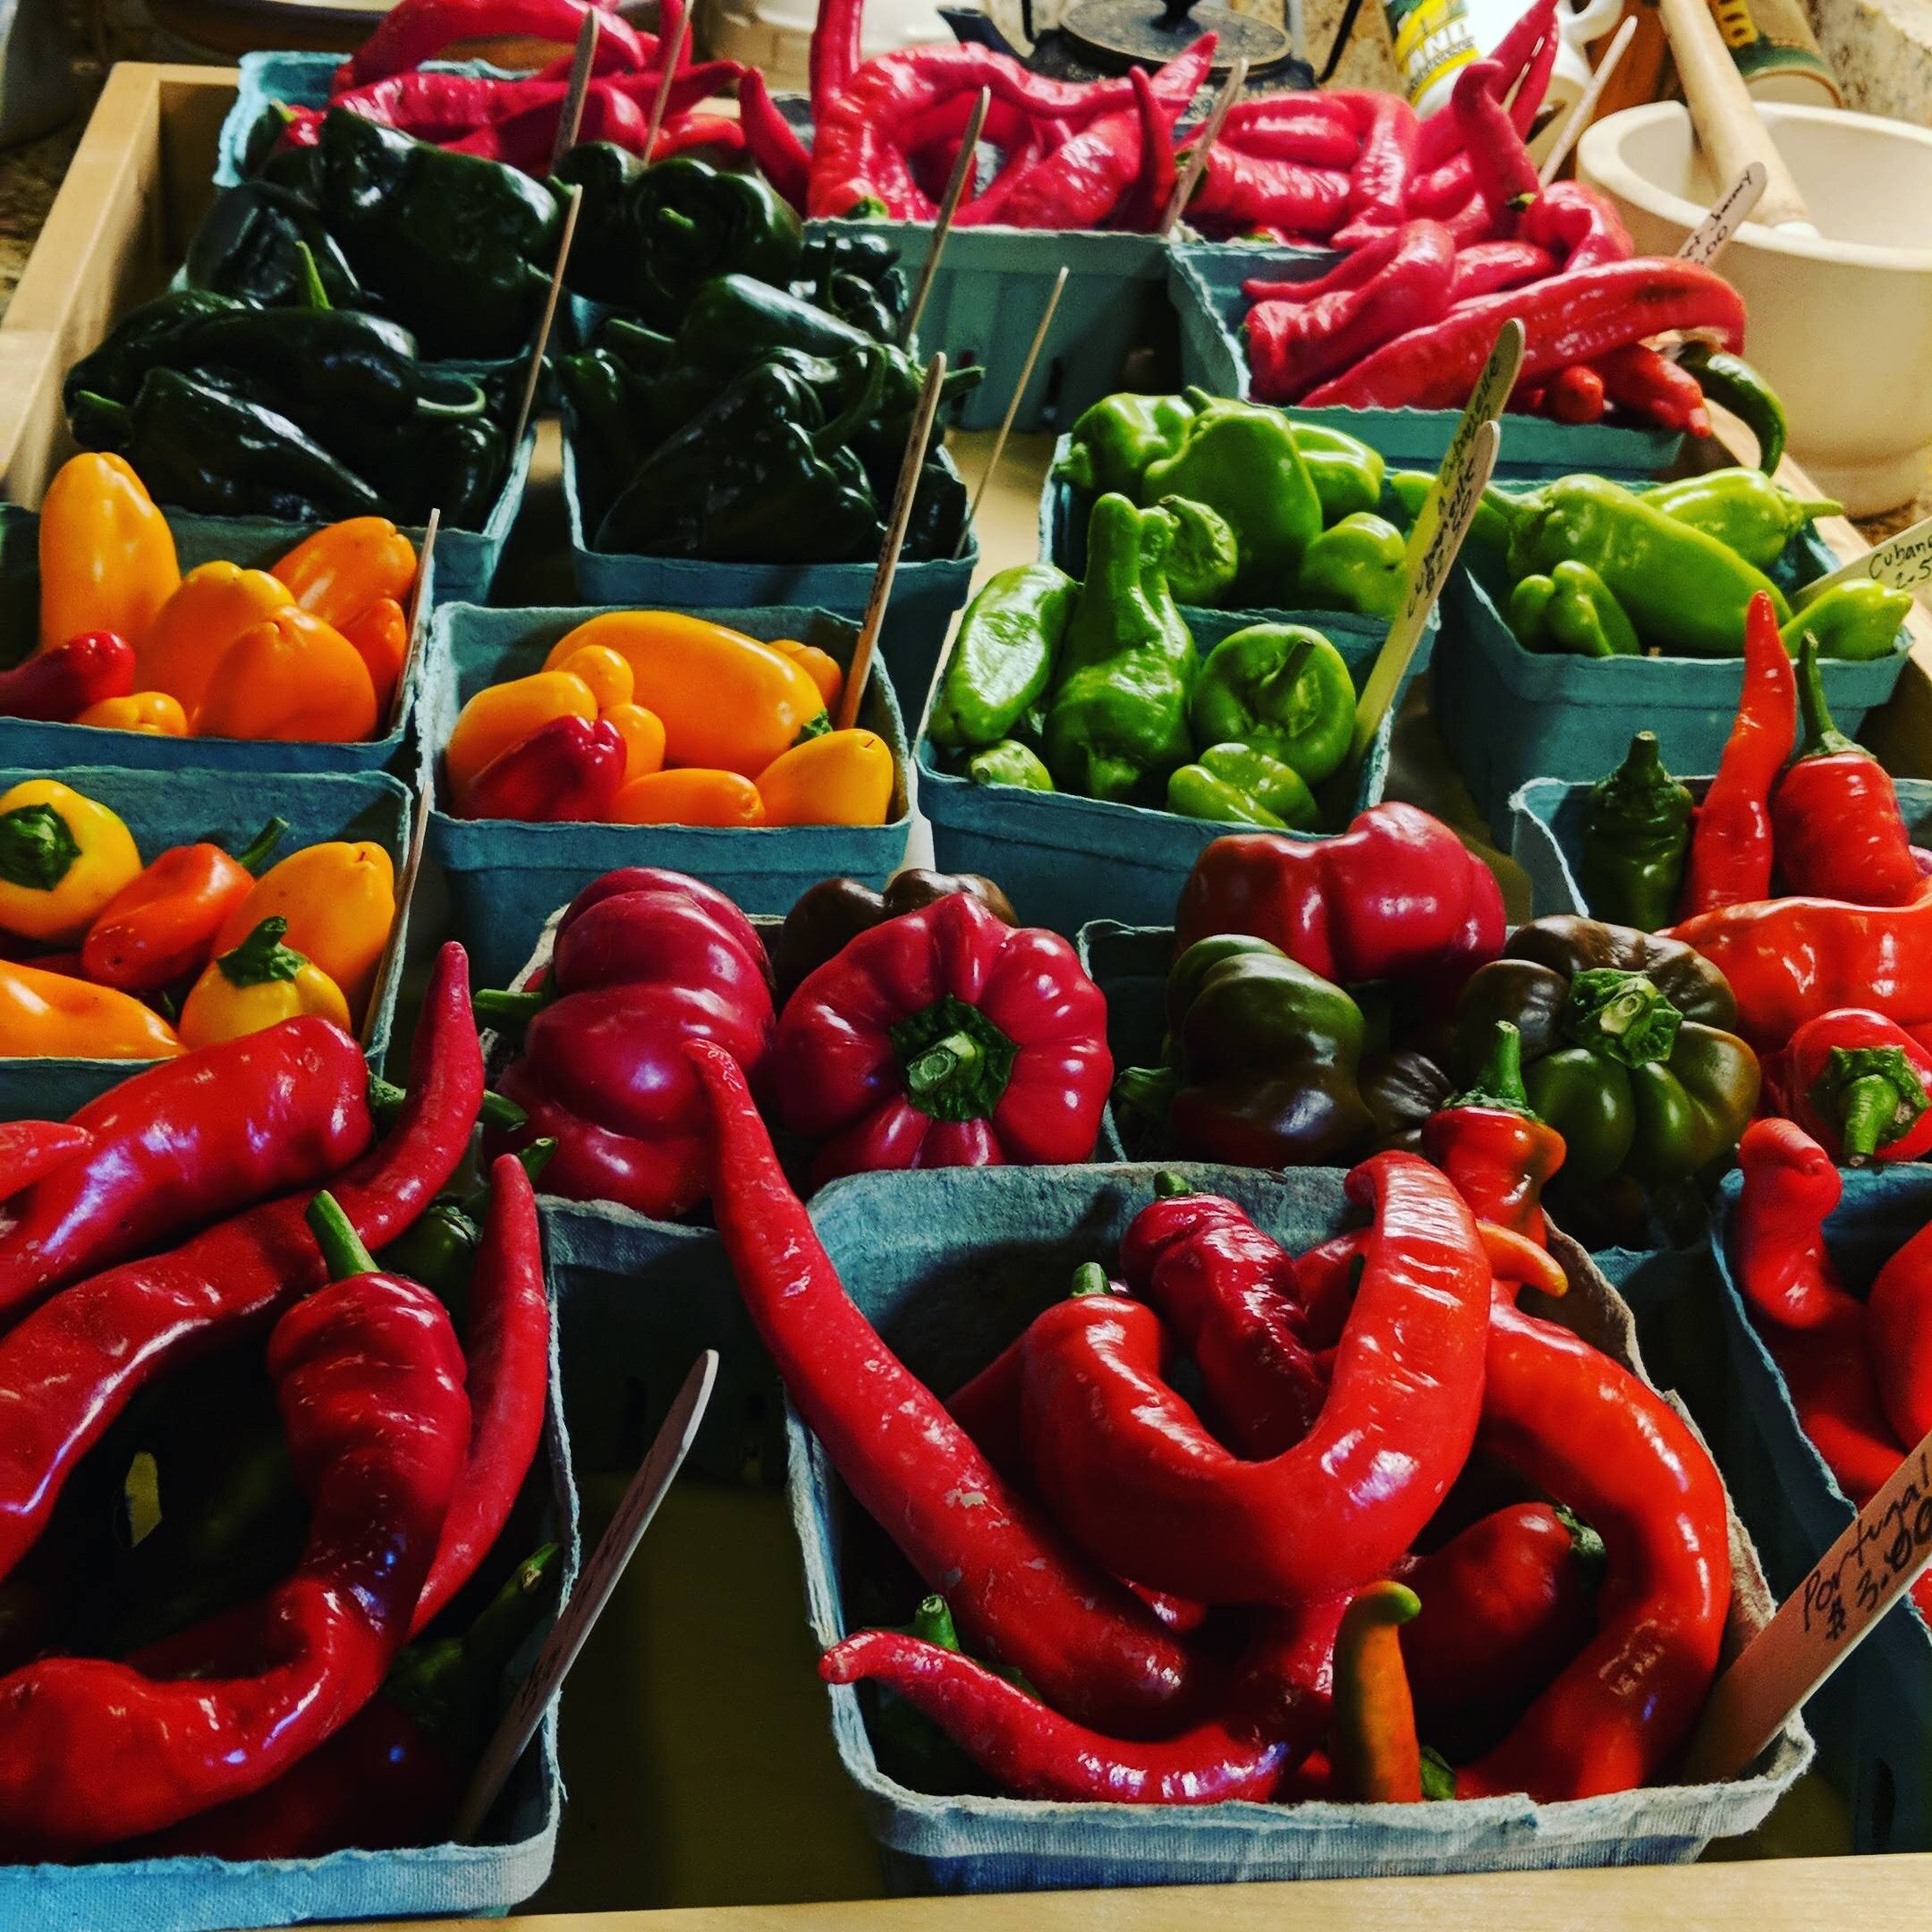 peppers at market.jpg